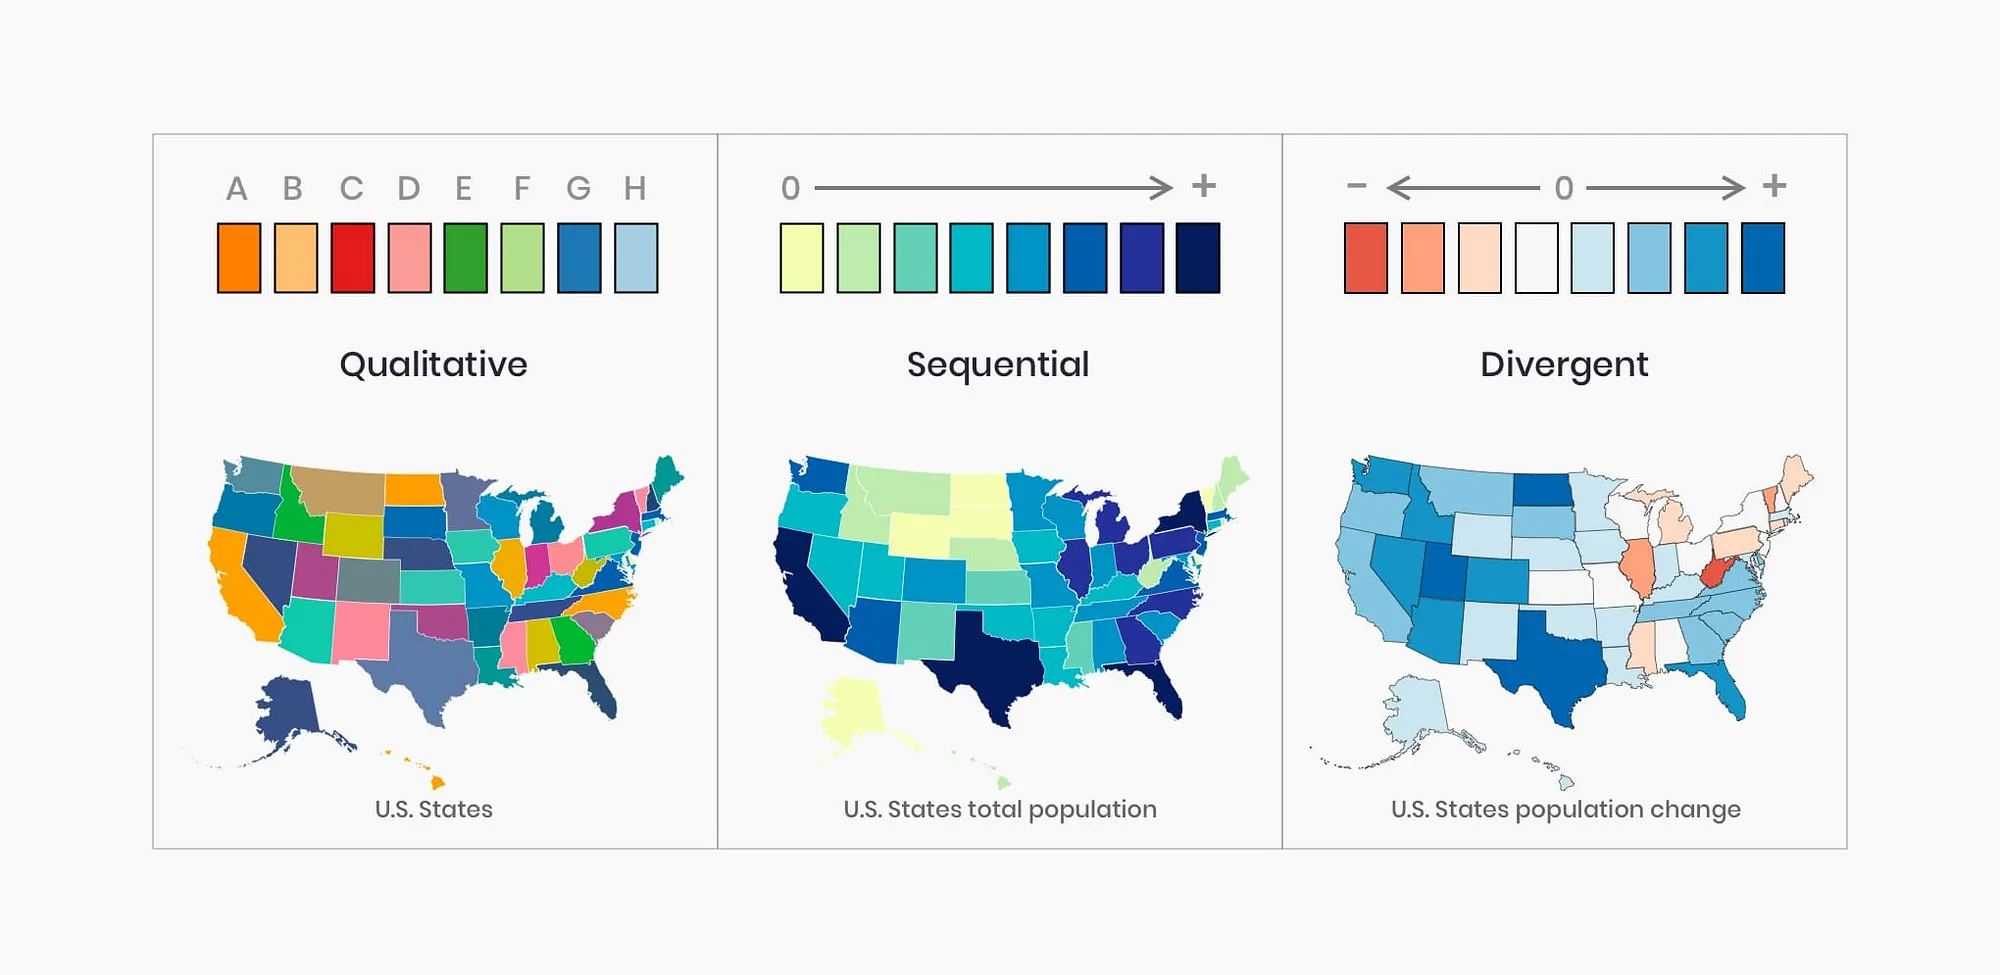 Apply color strategically such that it matches the nature of your data.